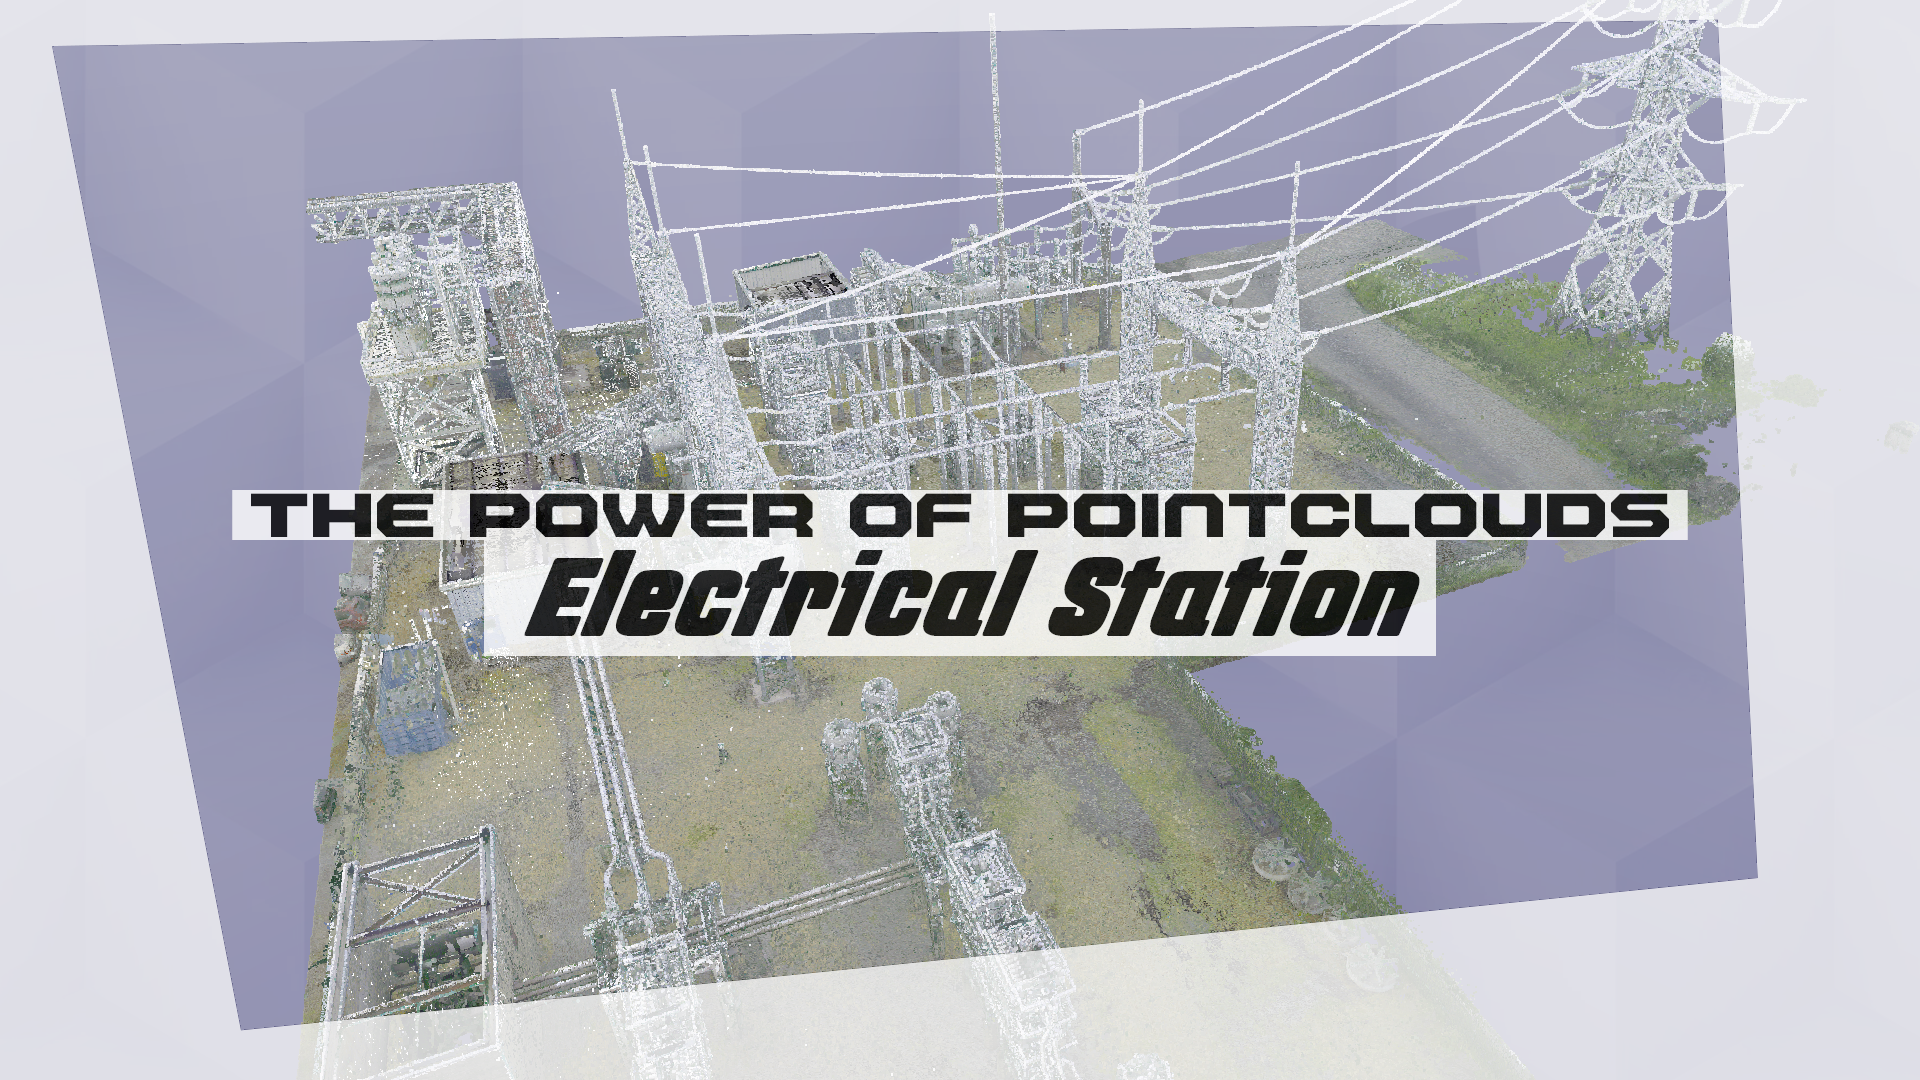 pointcloud electrical station engineering